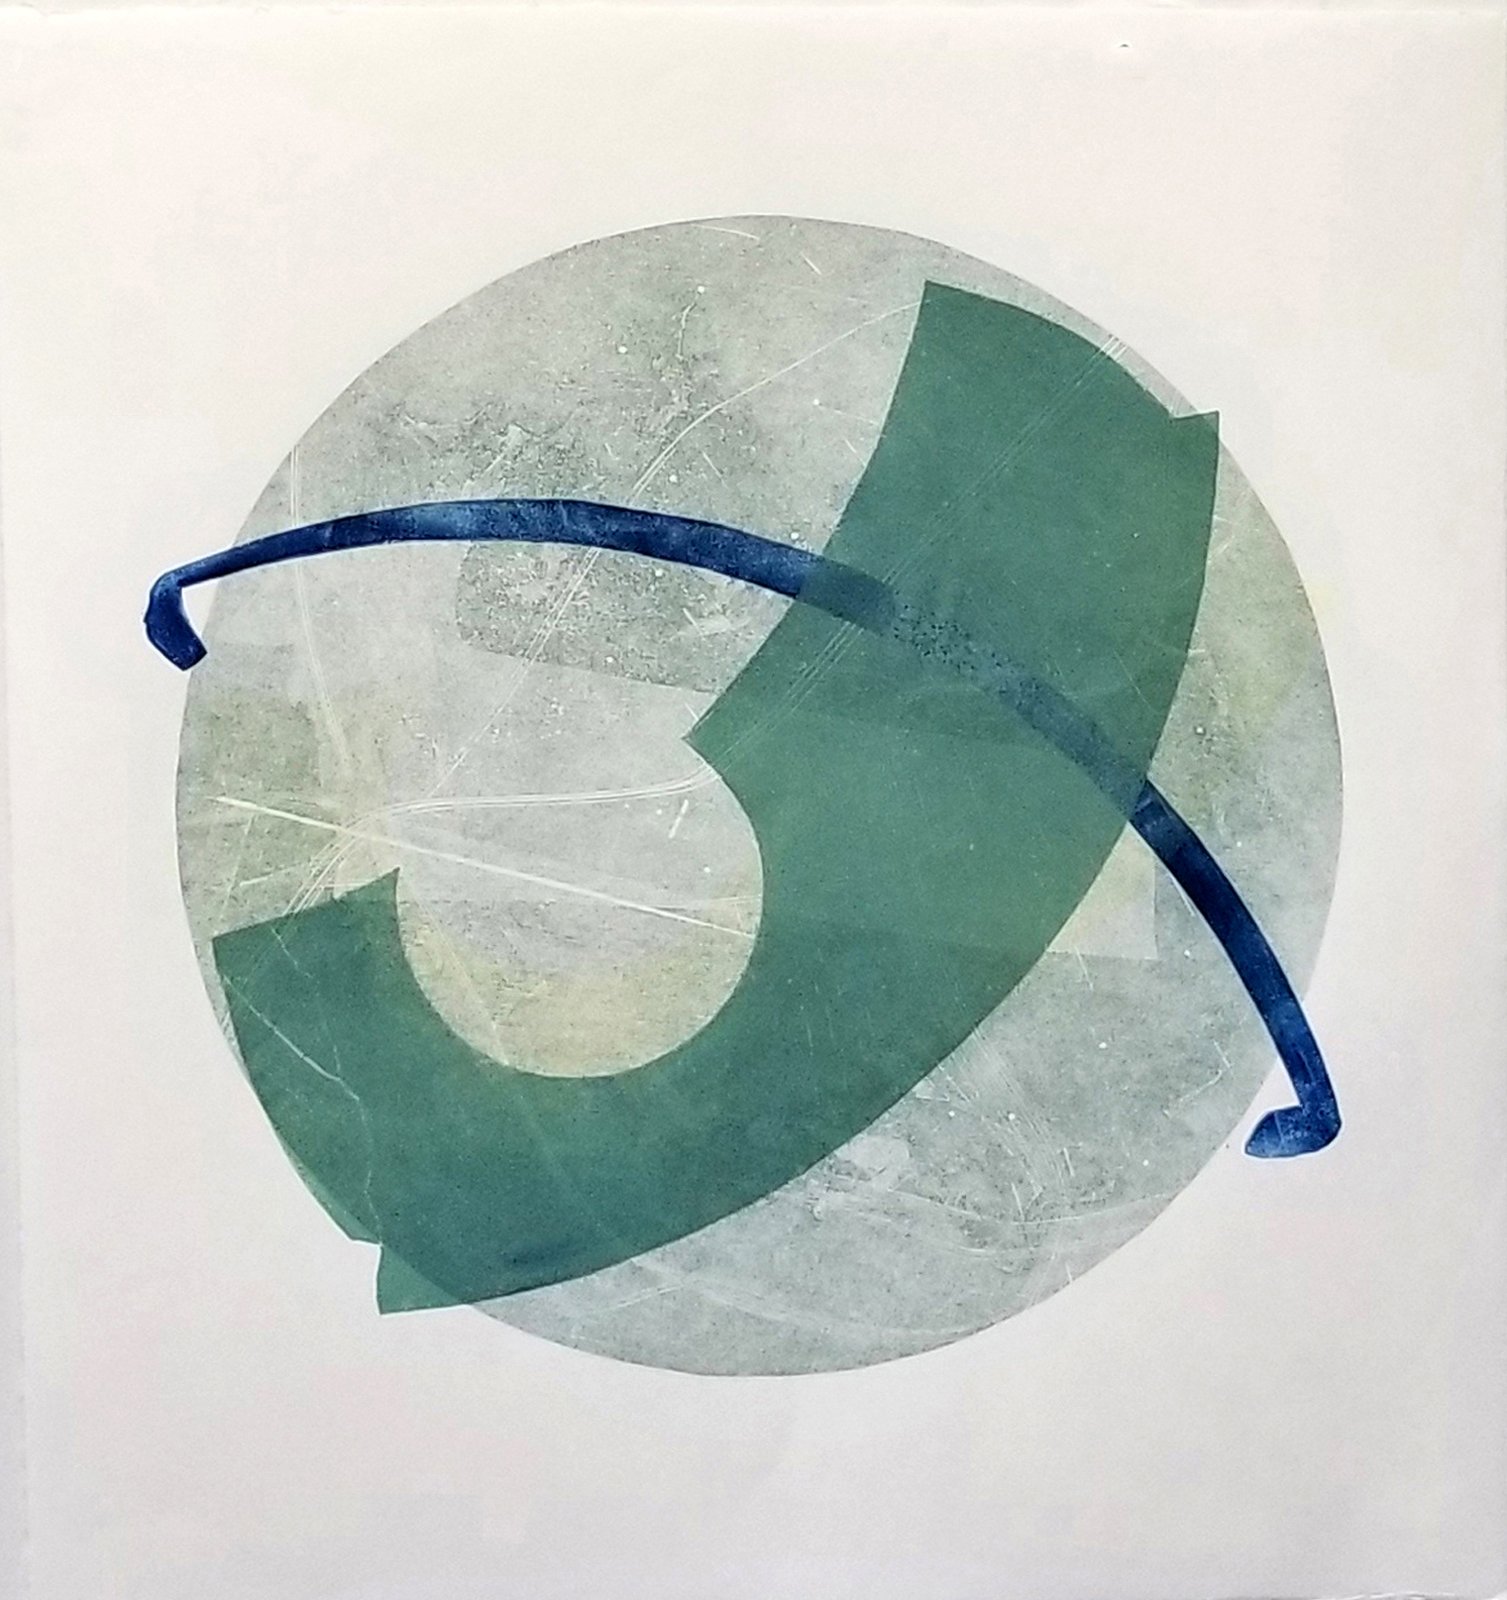  Elisa Lanzi  Shelter in Place no. 4  hand-pulled monotype, relief, collage, 16 3/4x 15 1/2 